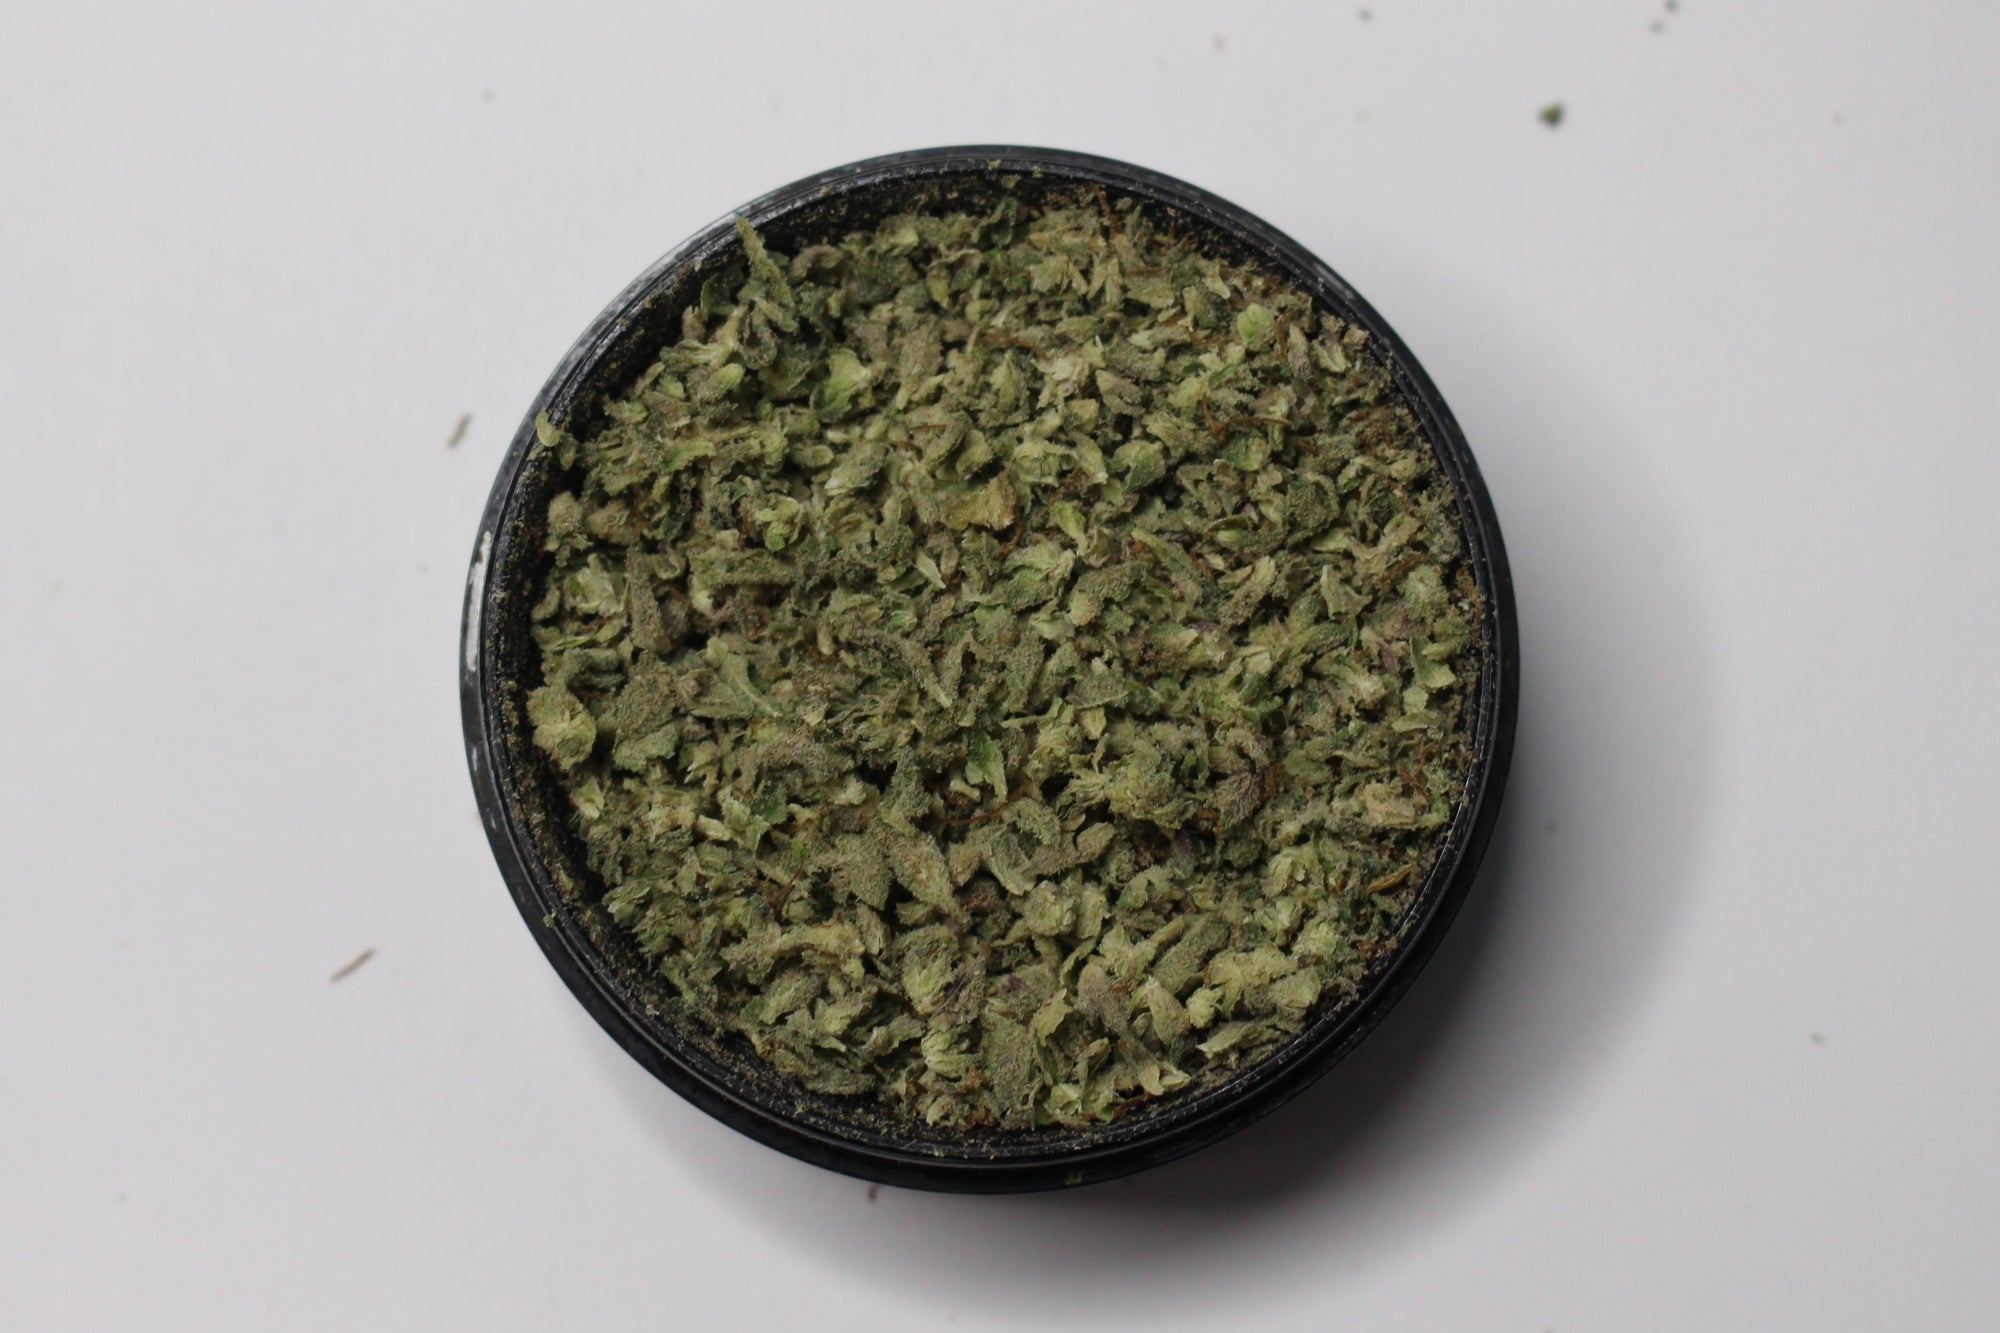 How To Use a Grinder